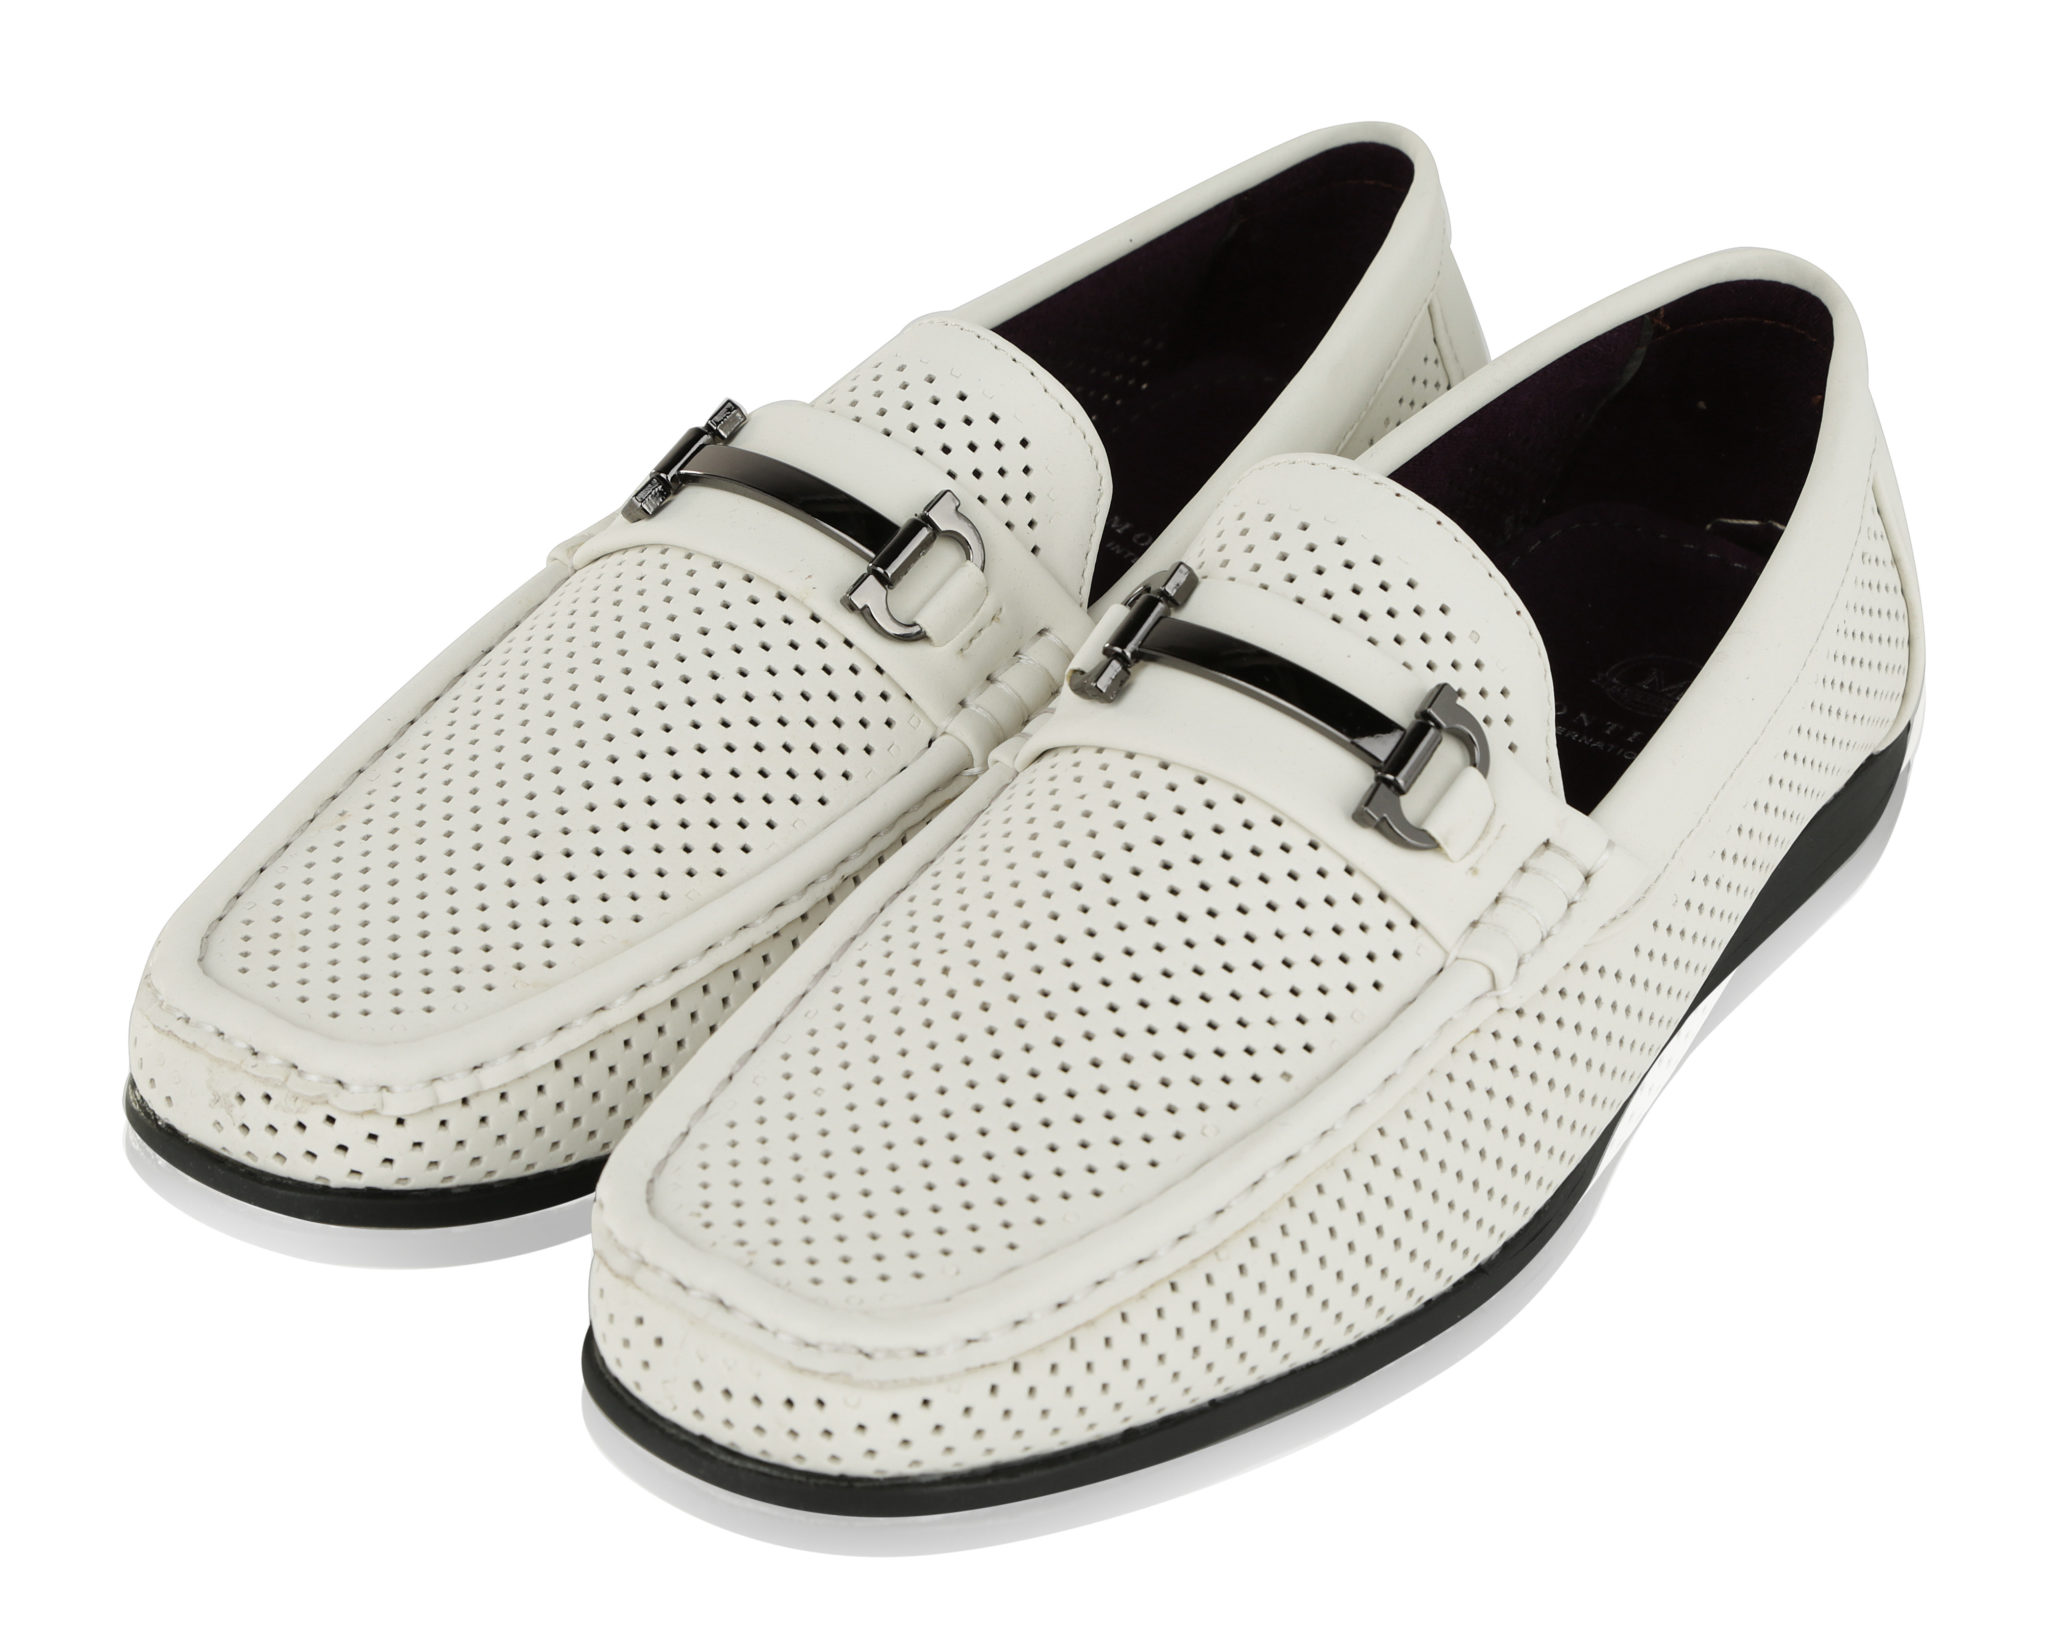 Montique S-45 Men's Metal Bit Perforated Casual Loafers Off-White